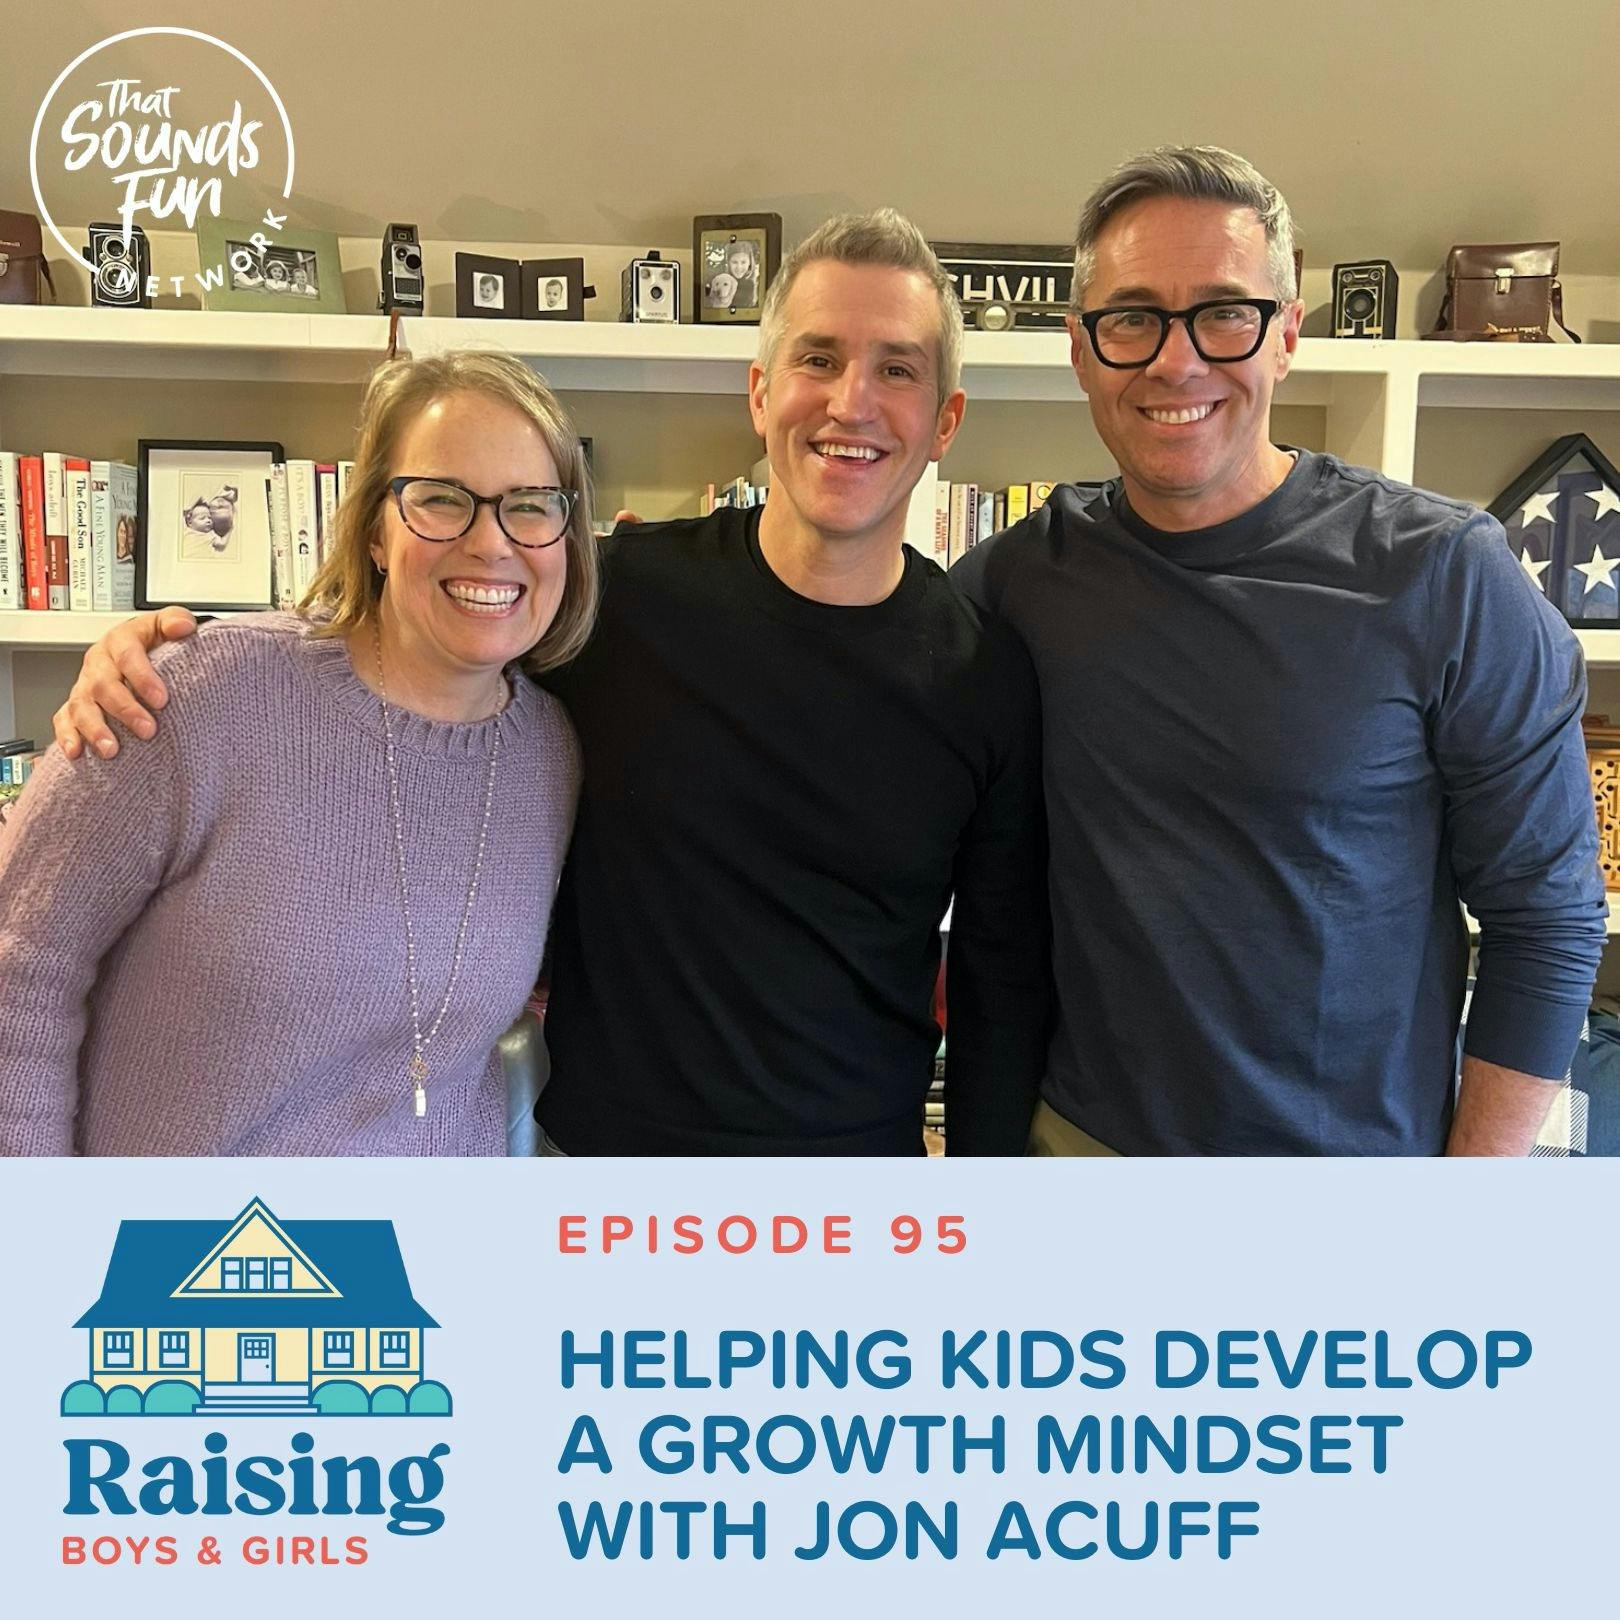 Episode 95: Helping Kids Develop a Growth Mindset with Jon Acuff